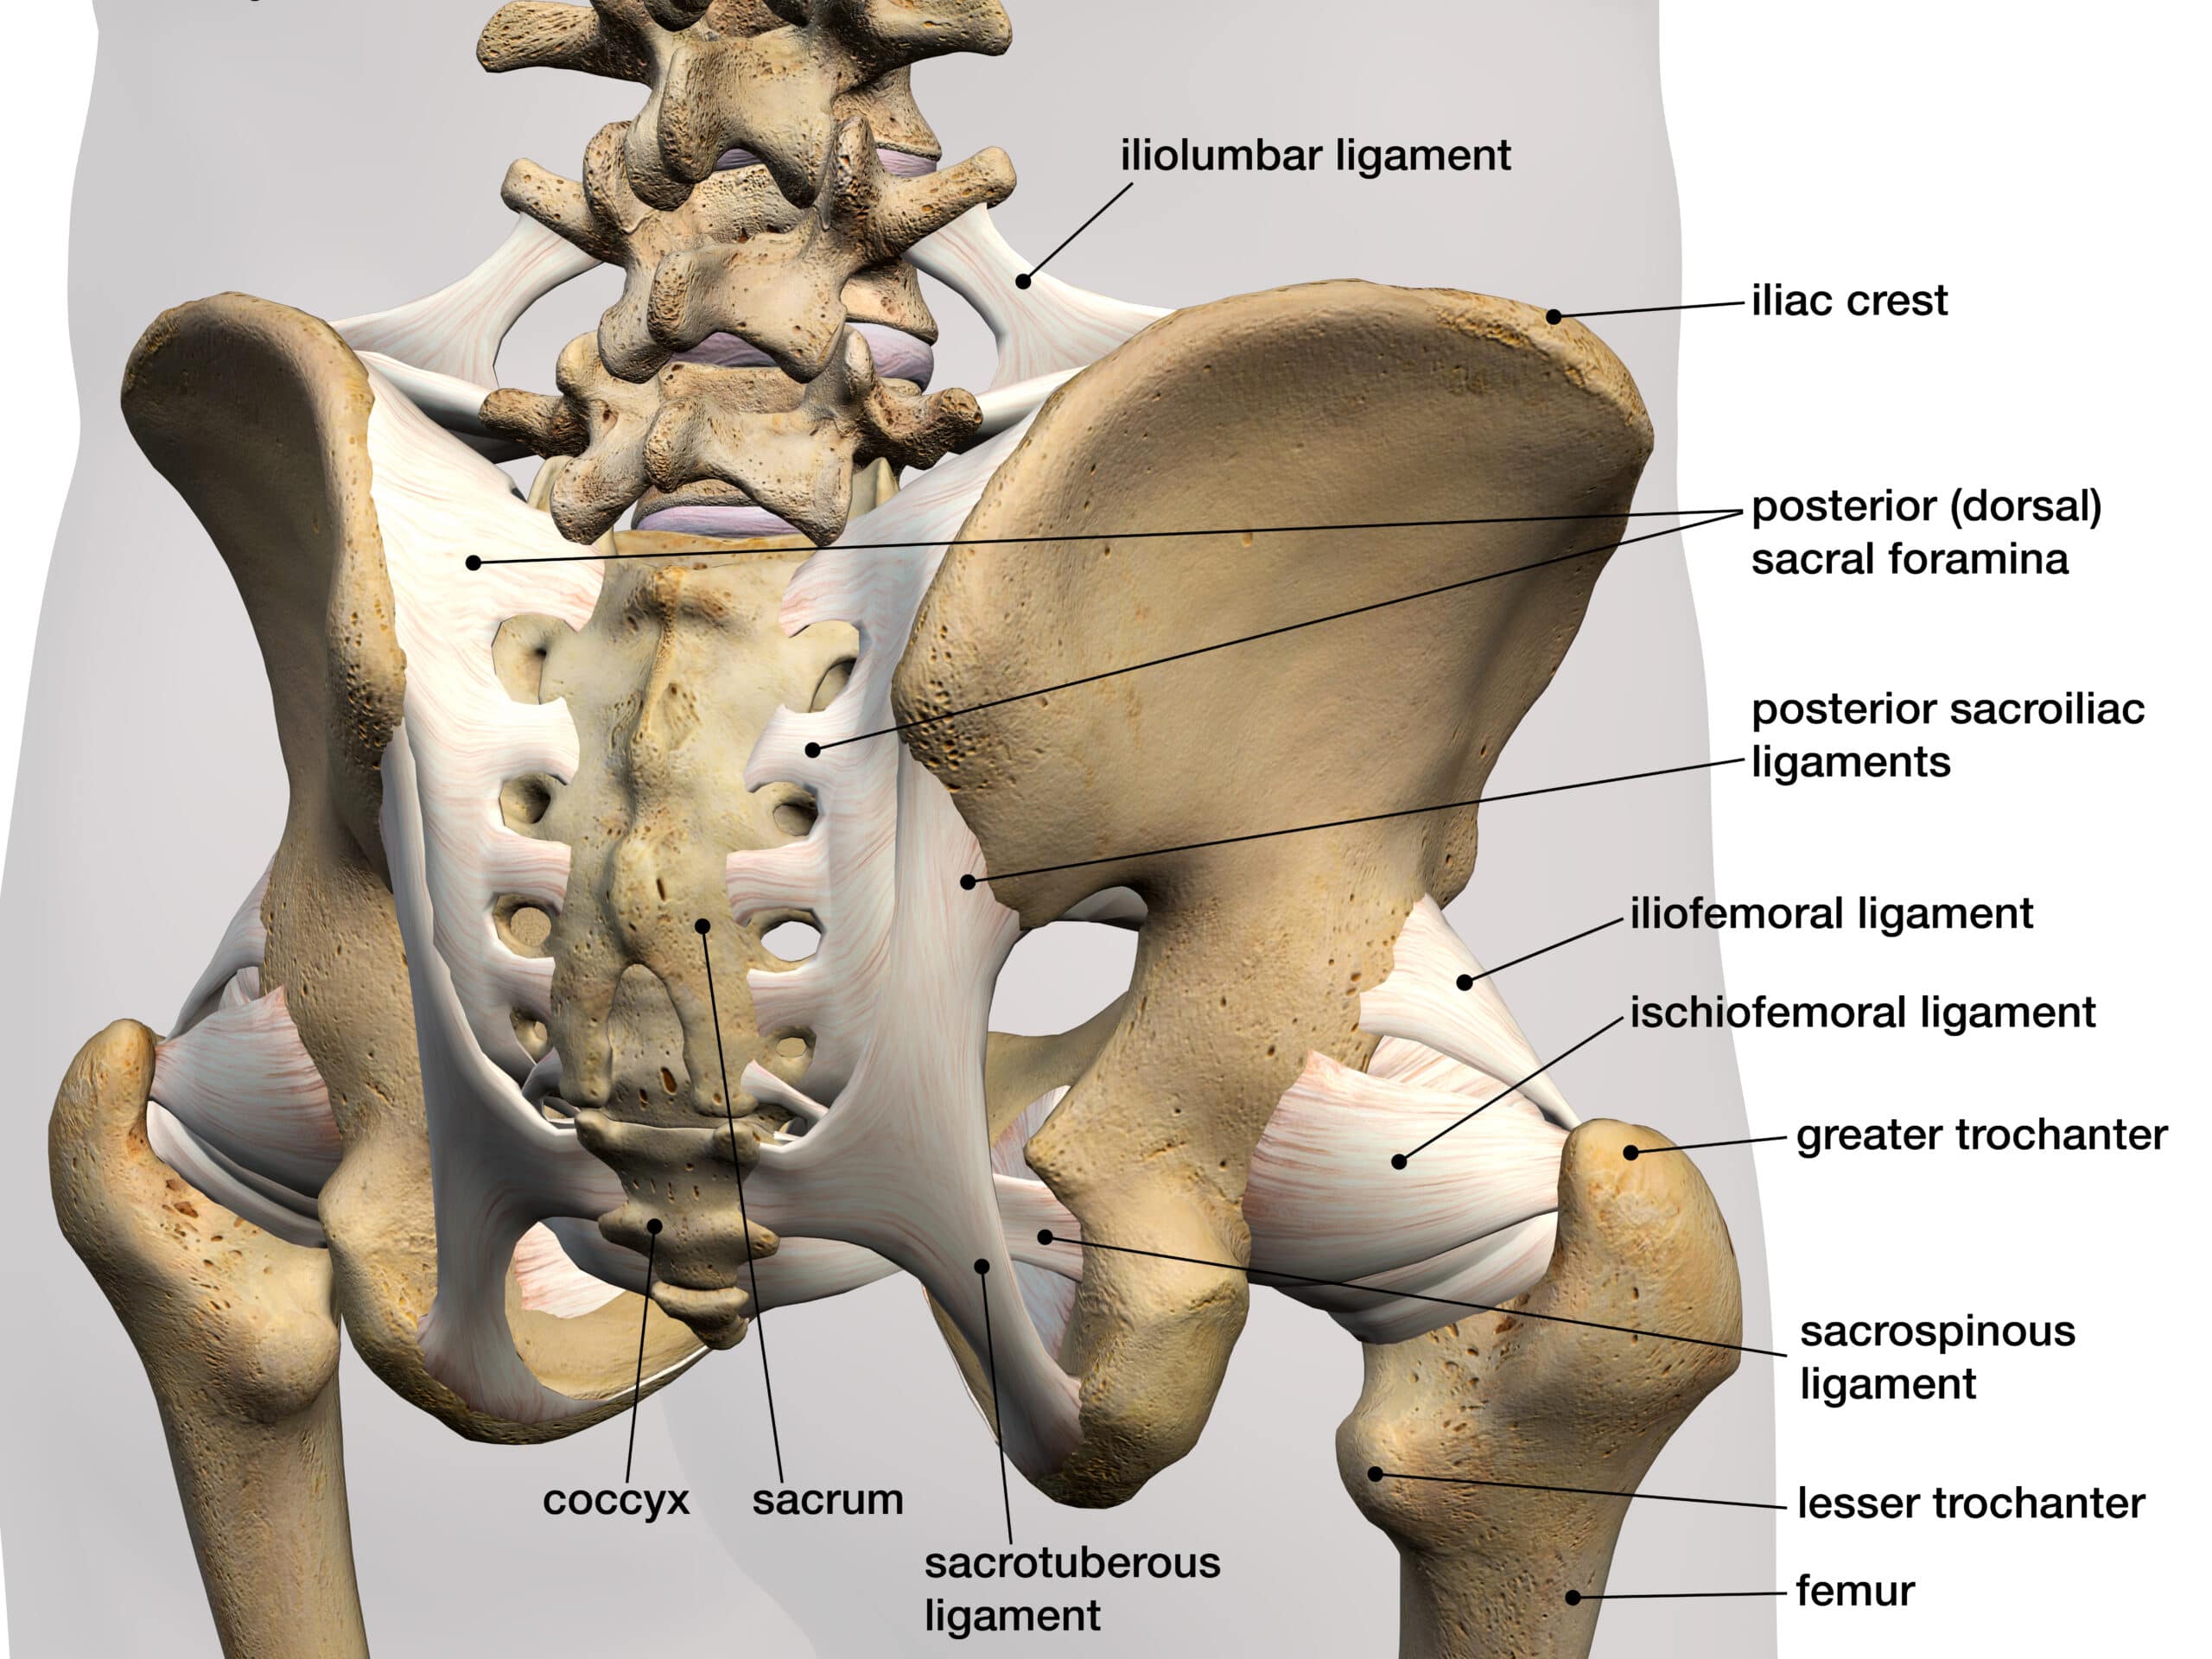 Complex Fracture Of The Pelvis: Do You Need An Orthopedic Surgeon